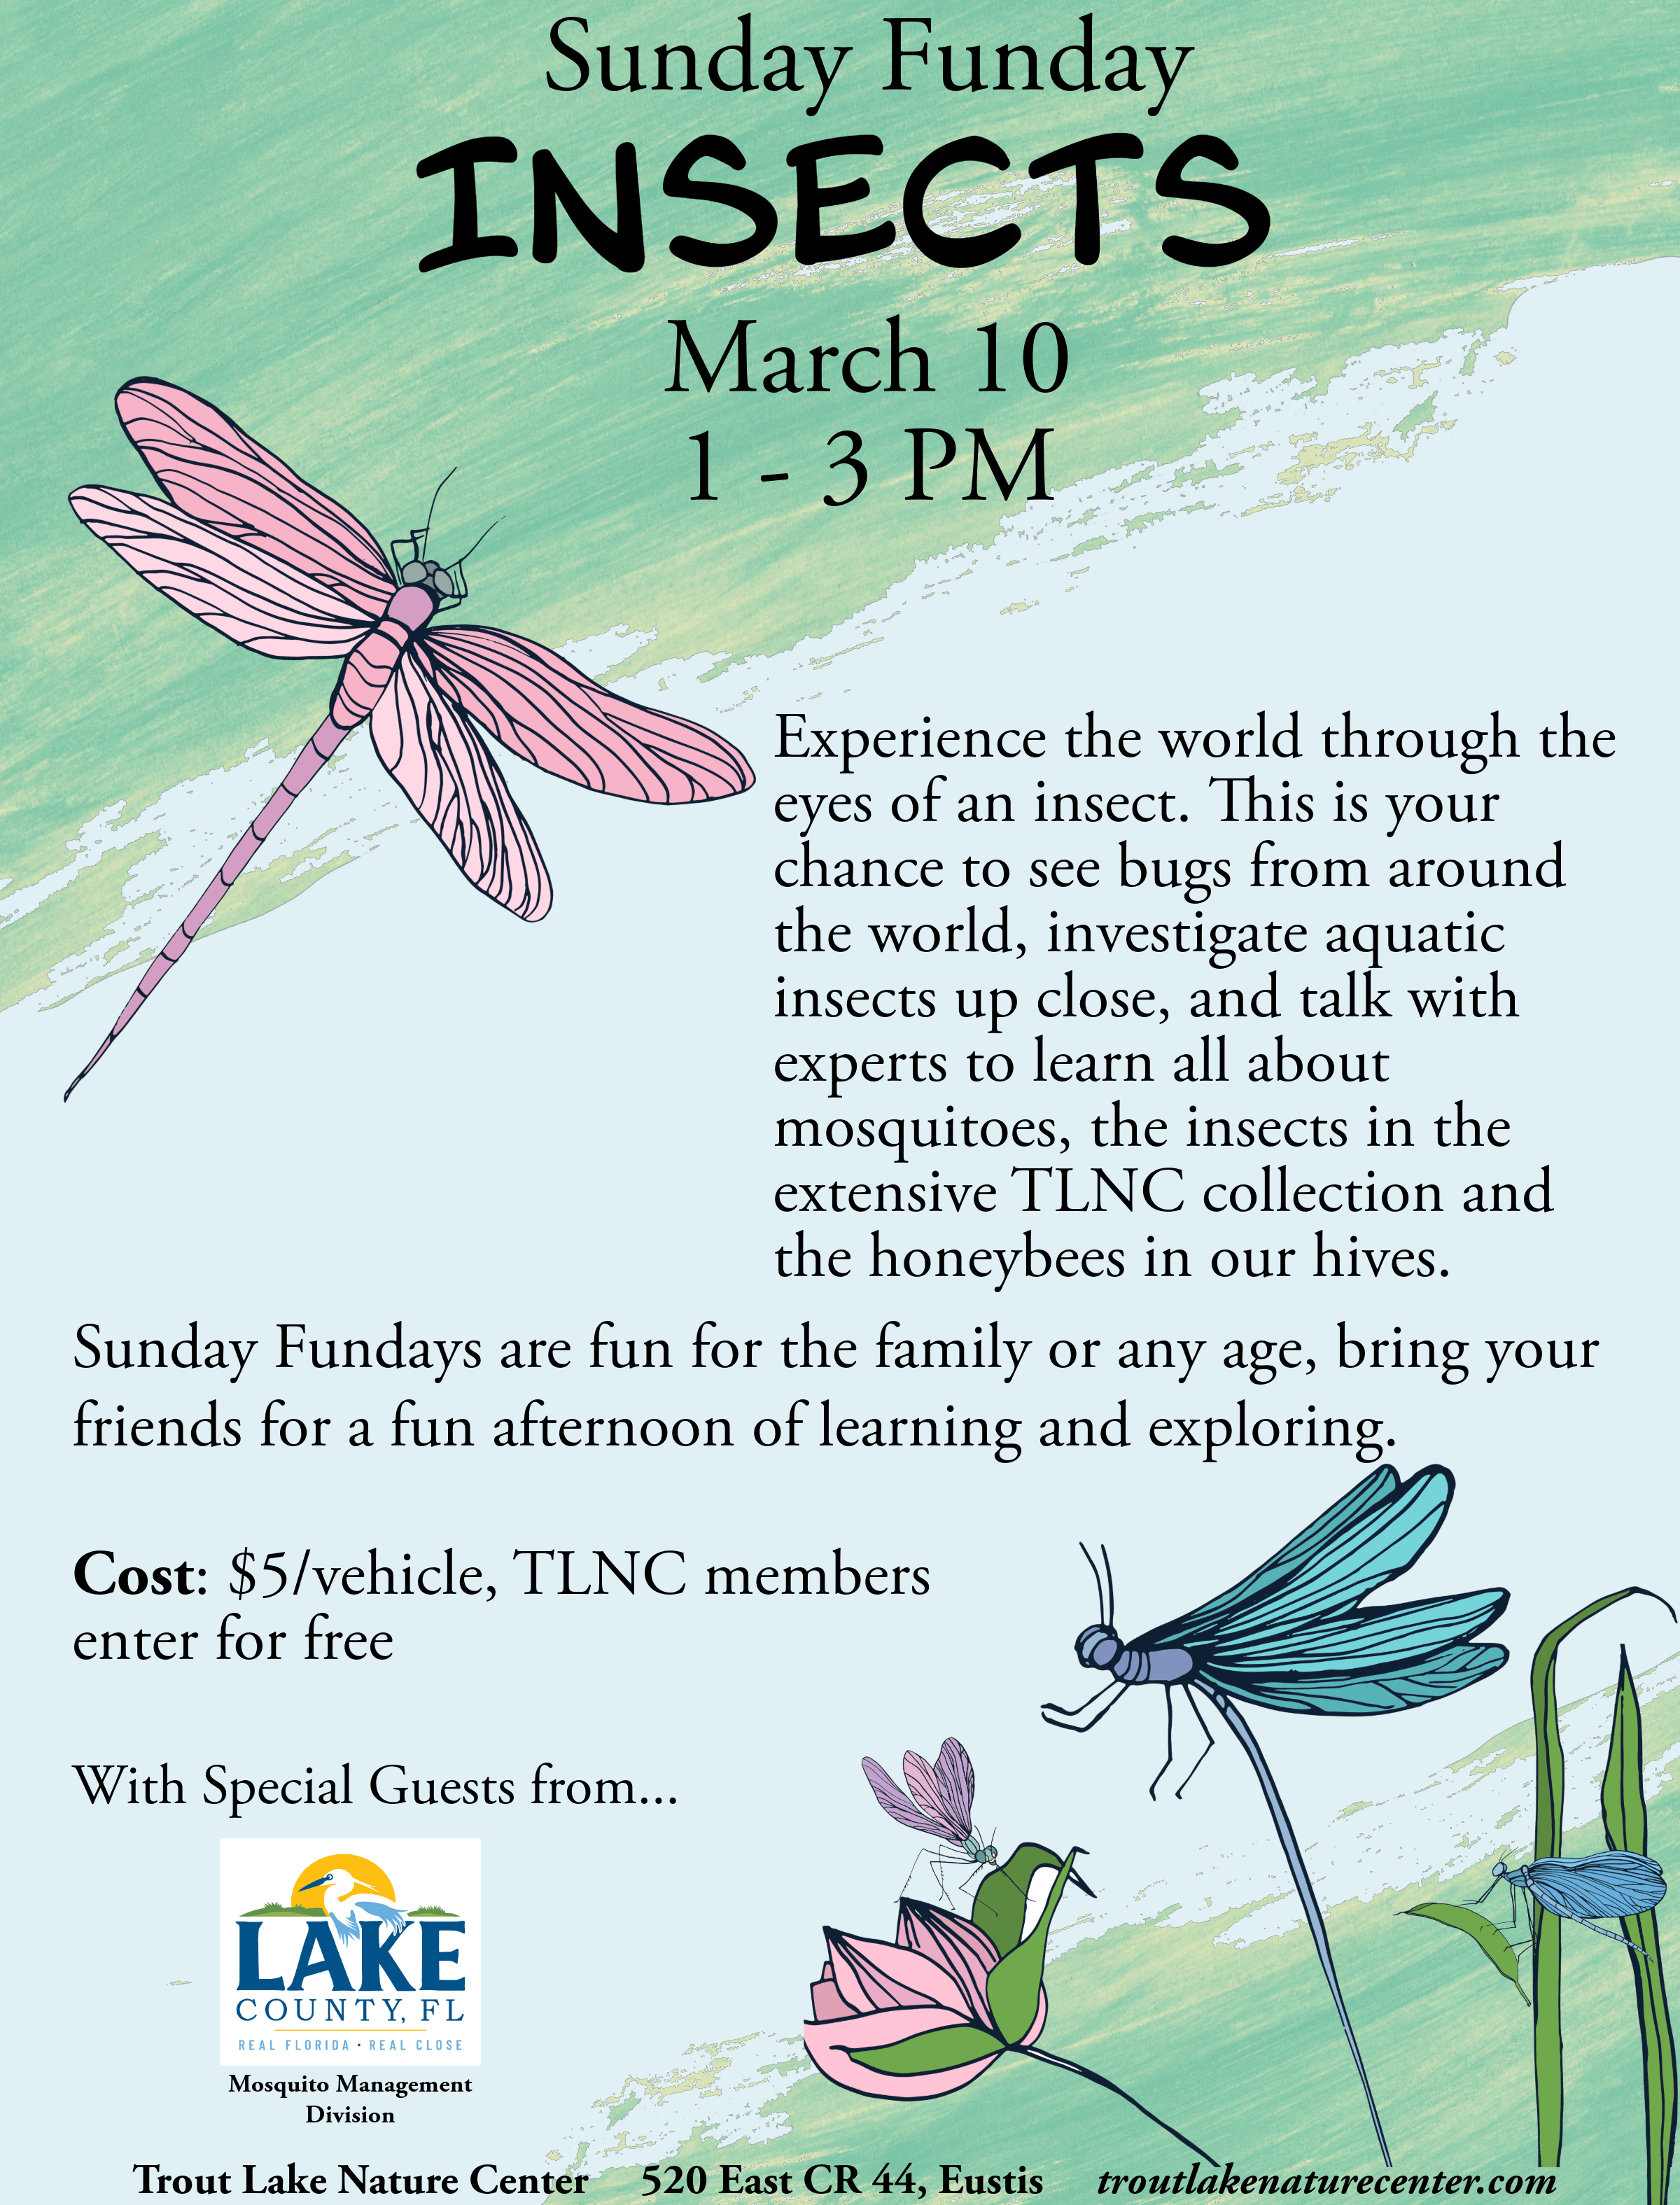 Event flyer with dragonflies and flowers for the insect Sunday Funday event. Special guests at the event include the Lake County Mosquito Management Division.